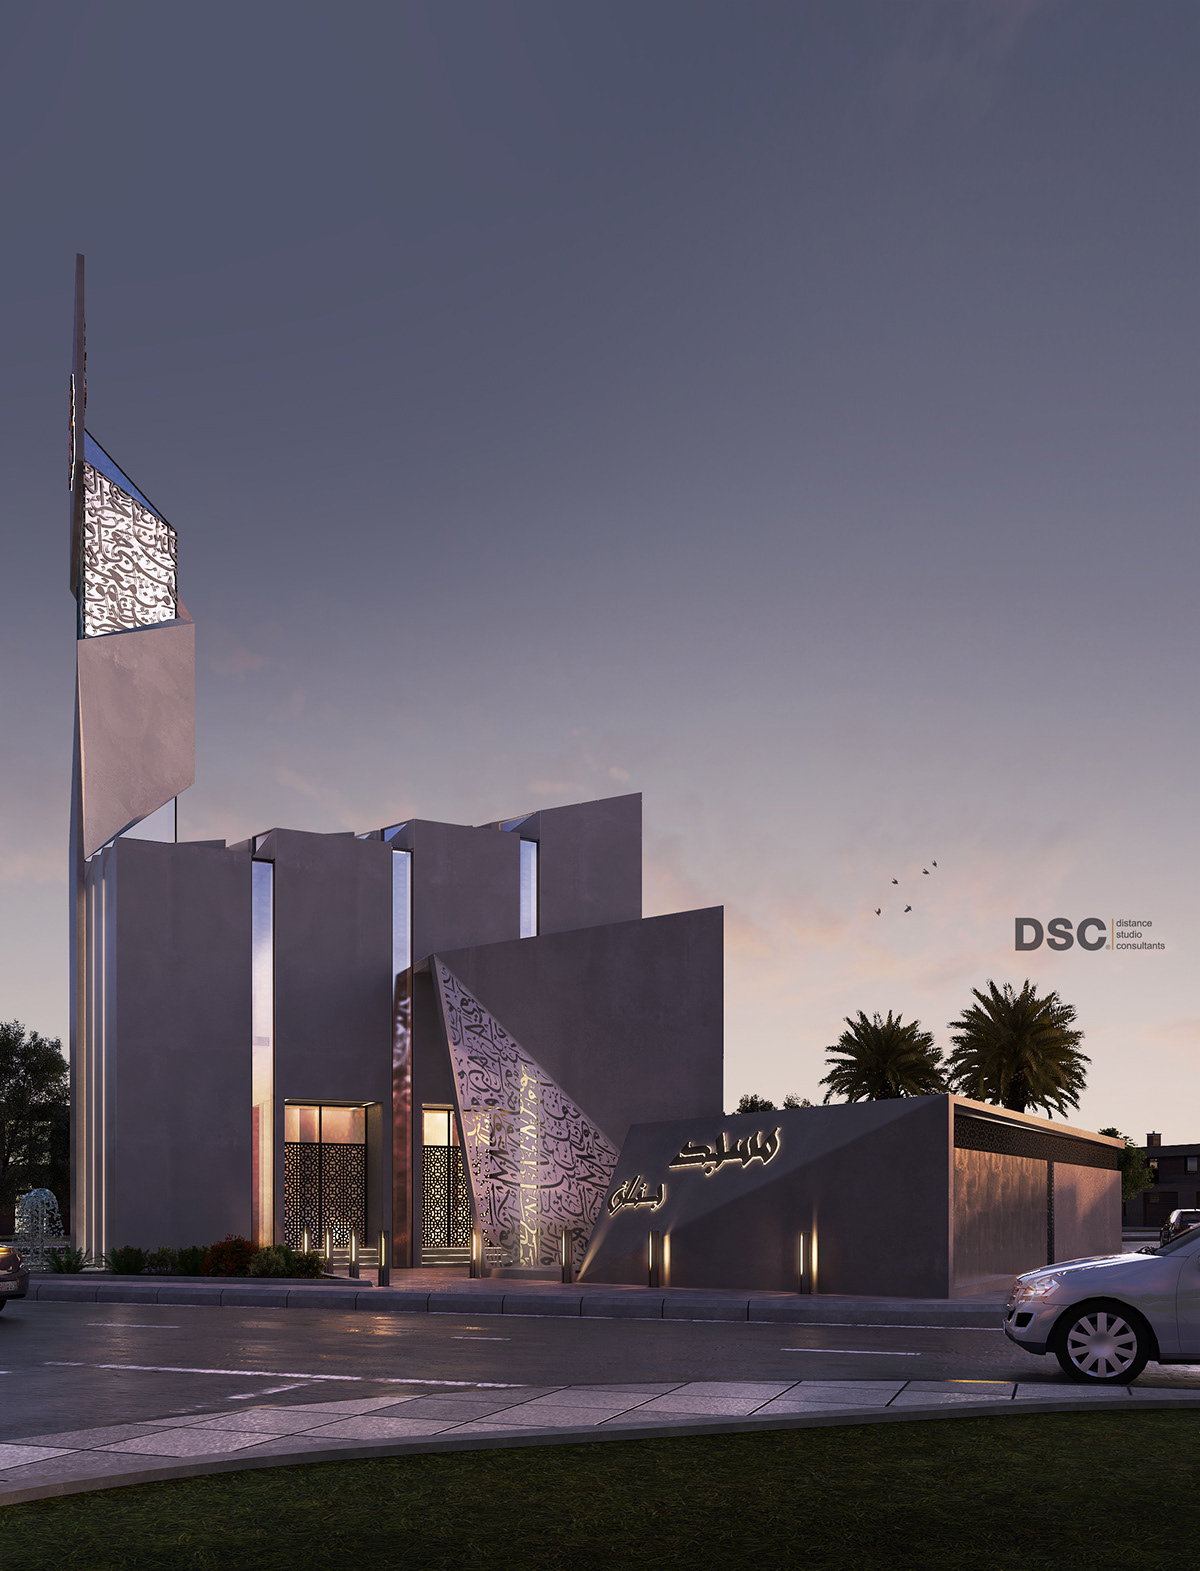 architecture mosque sacred prototype creative Competition iconic Minimalism abstract symbolism